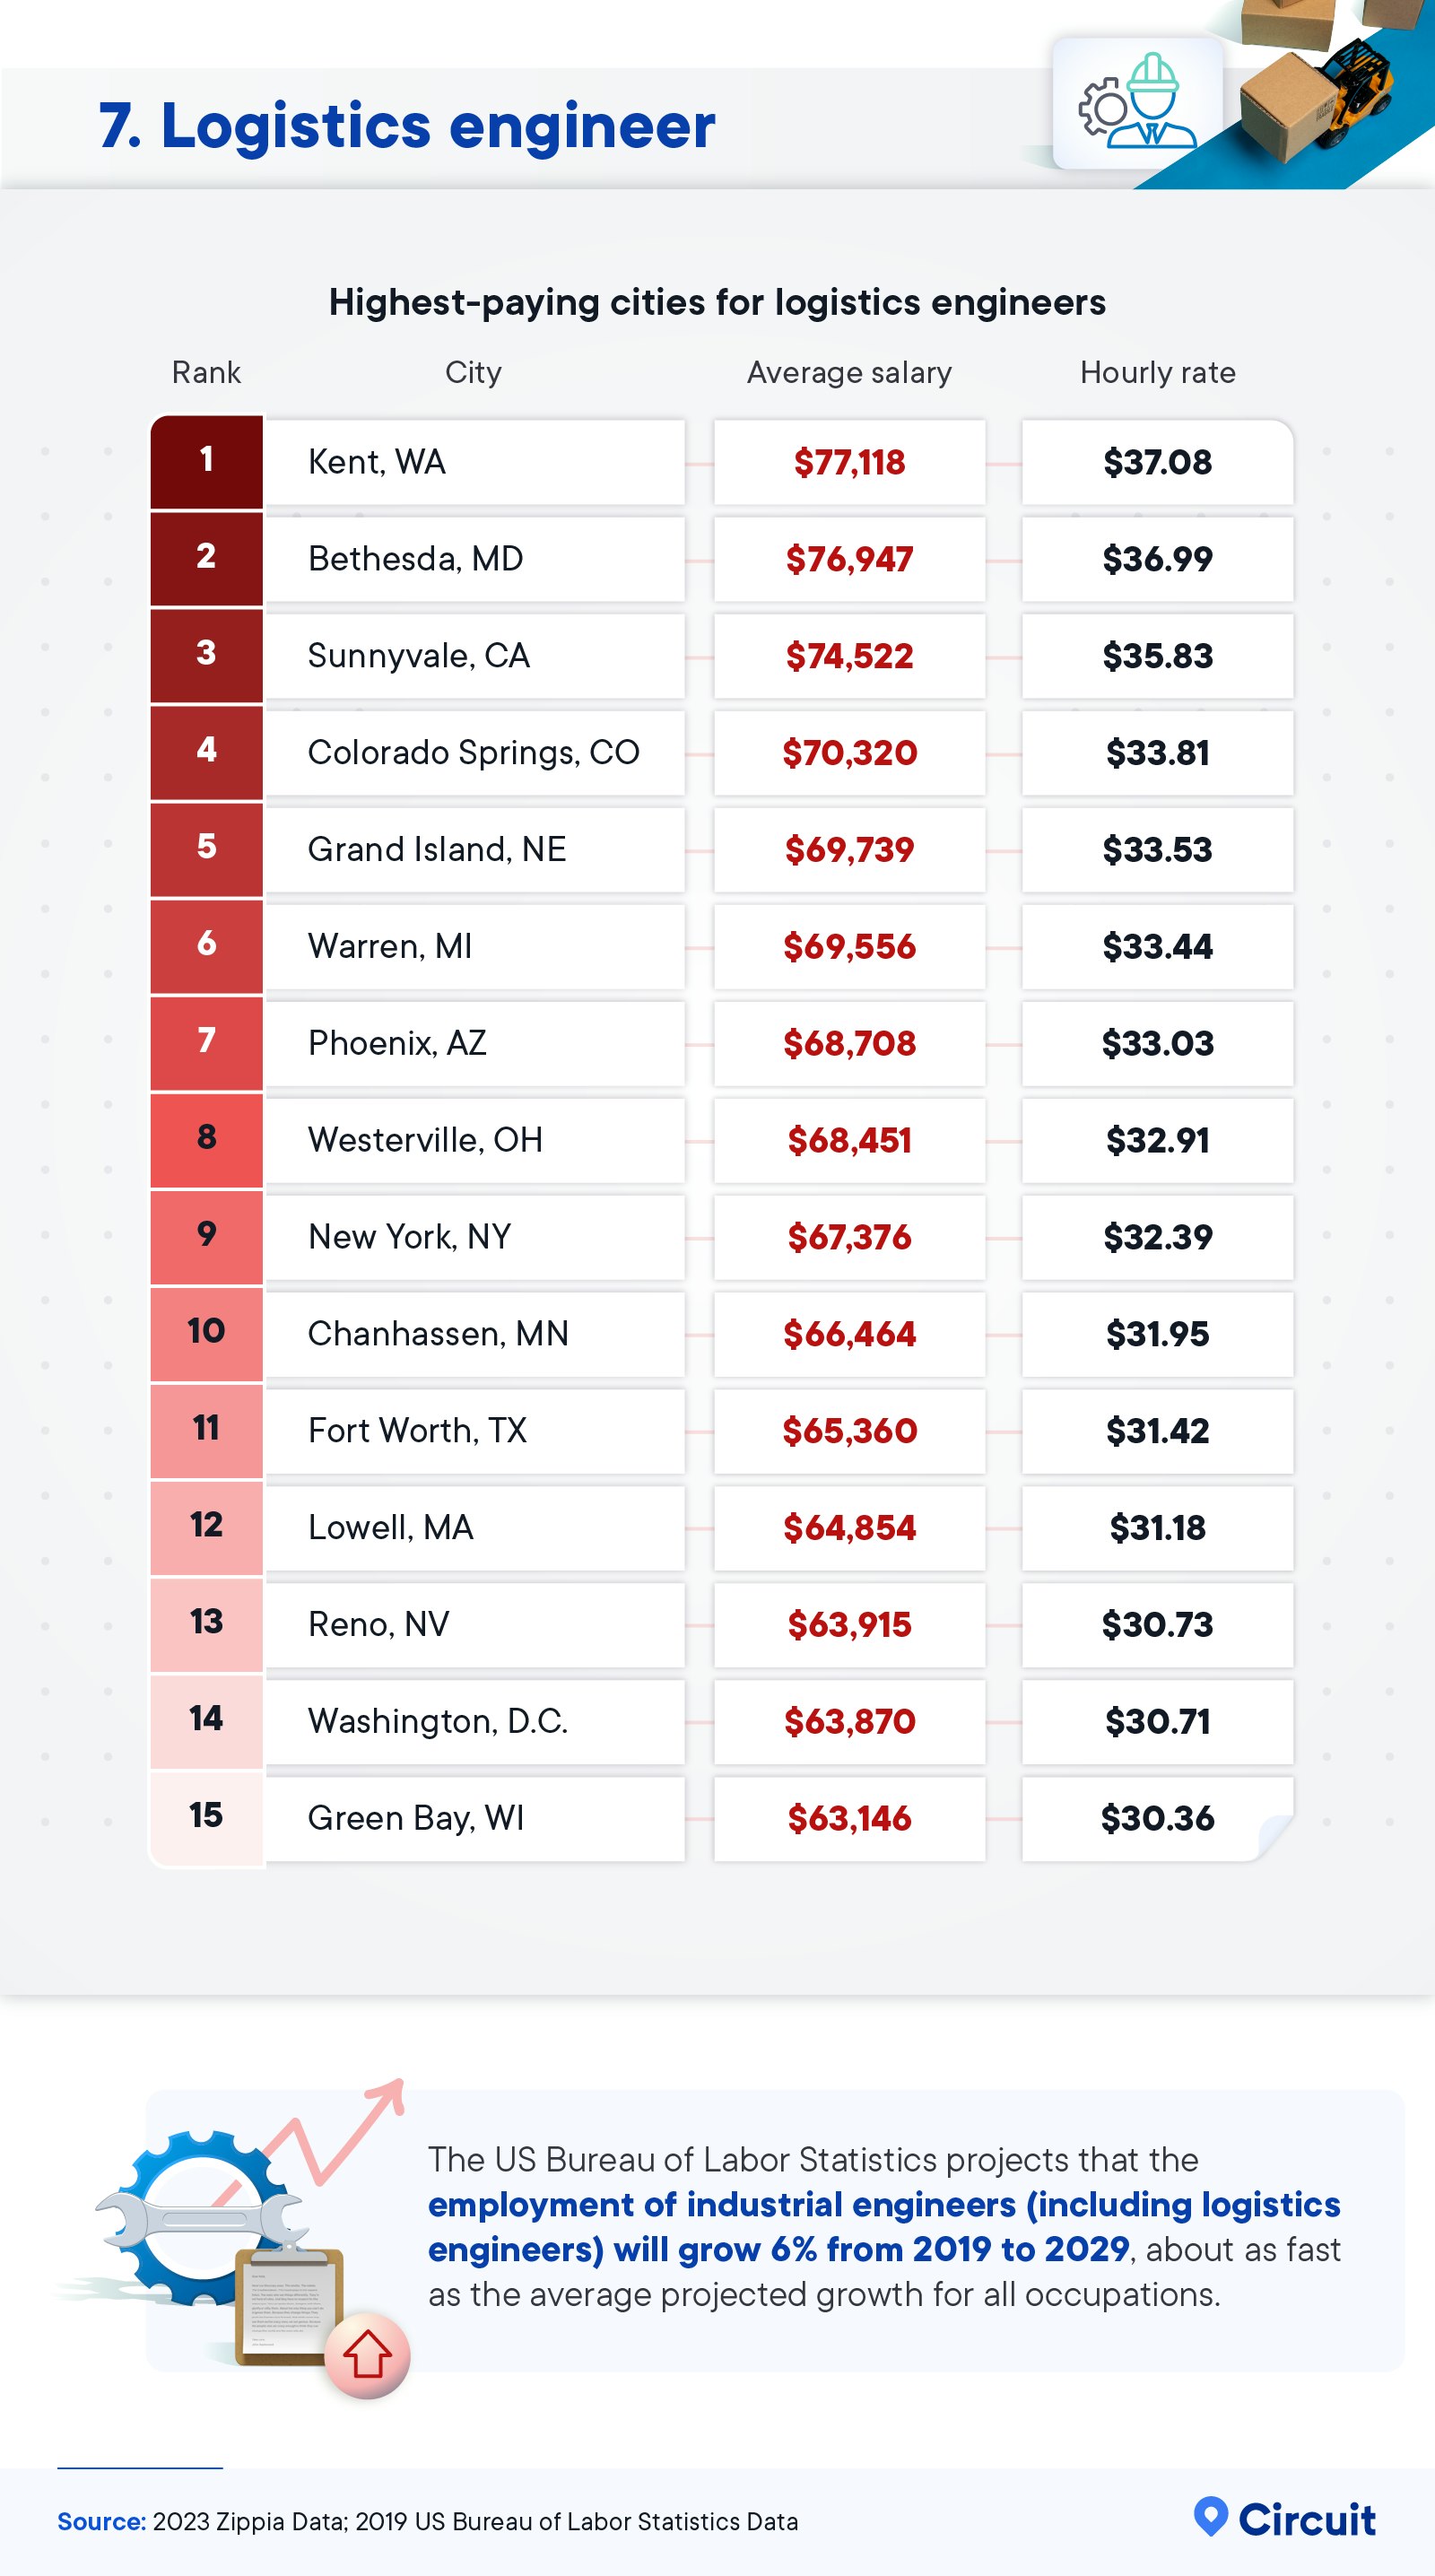 Highest-paying cities for logistics engineers